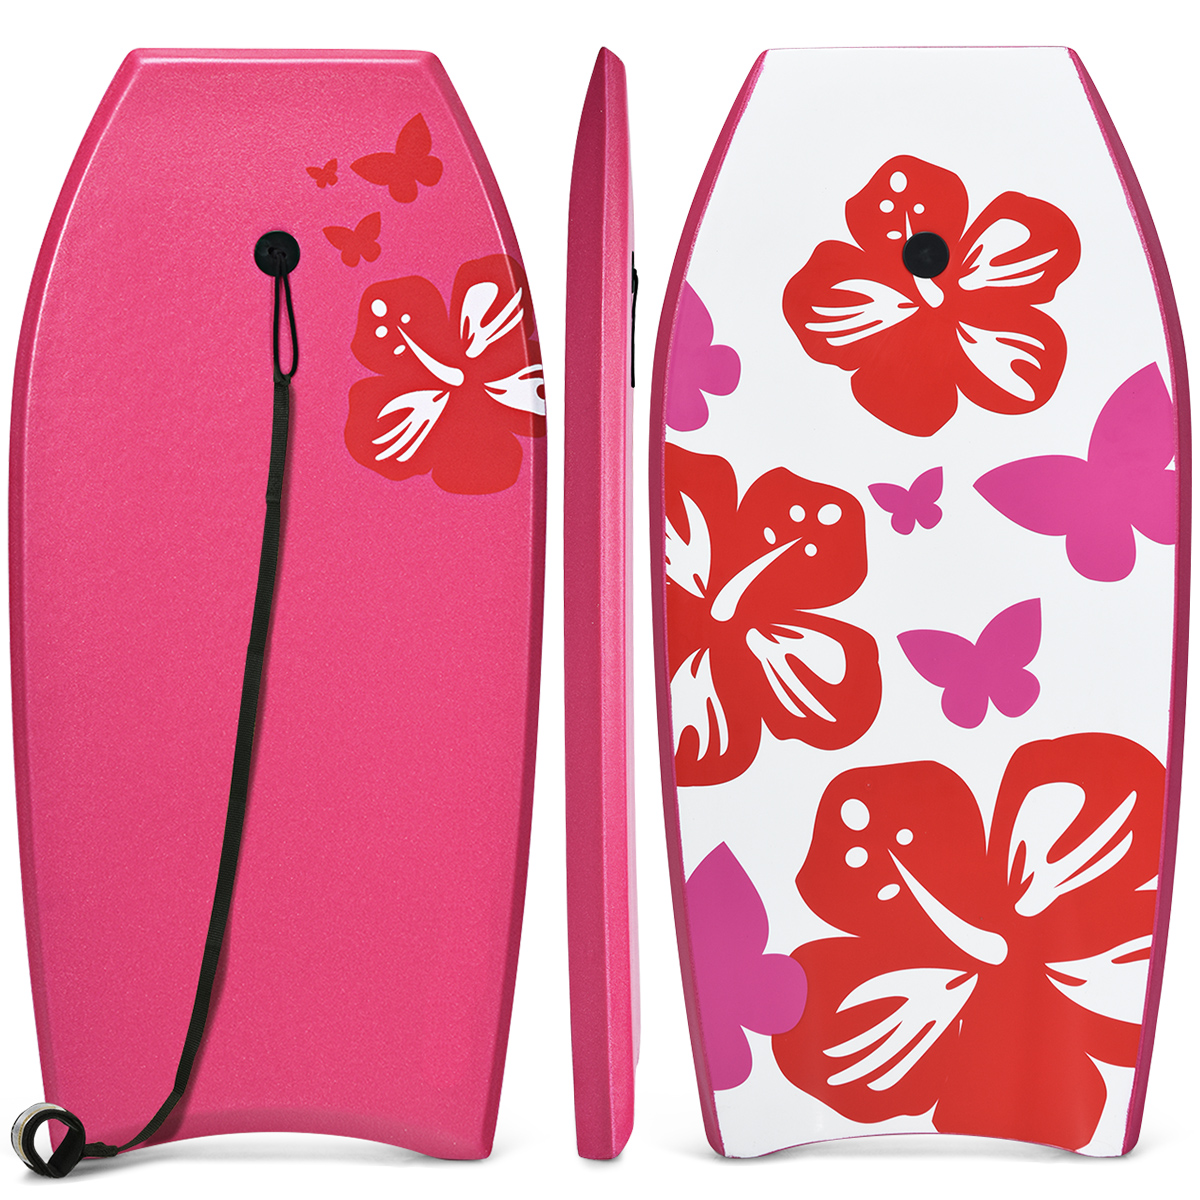 Up Stand Bodyboard Rosa COSTWAY Paddle,